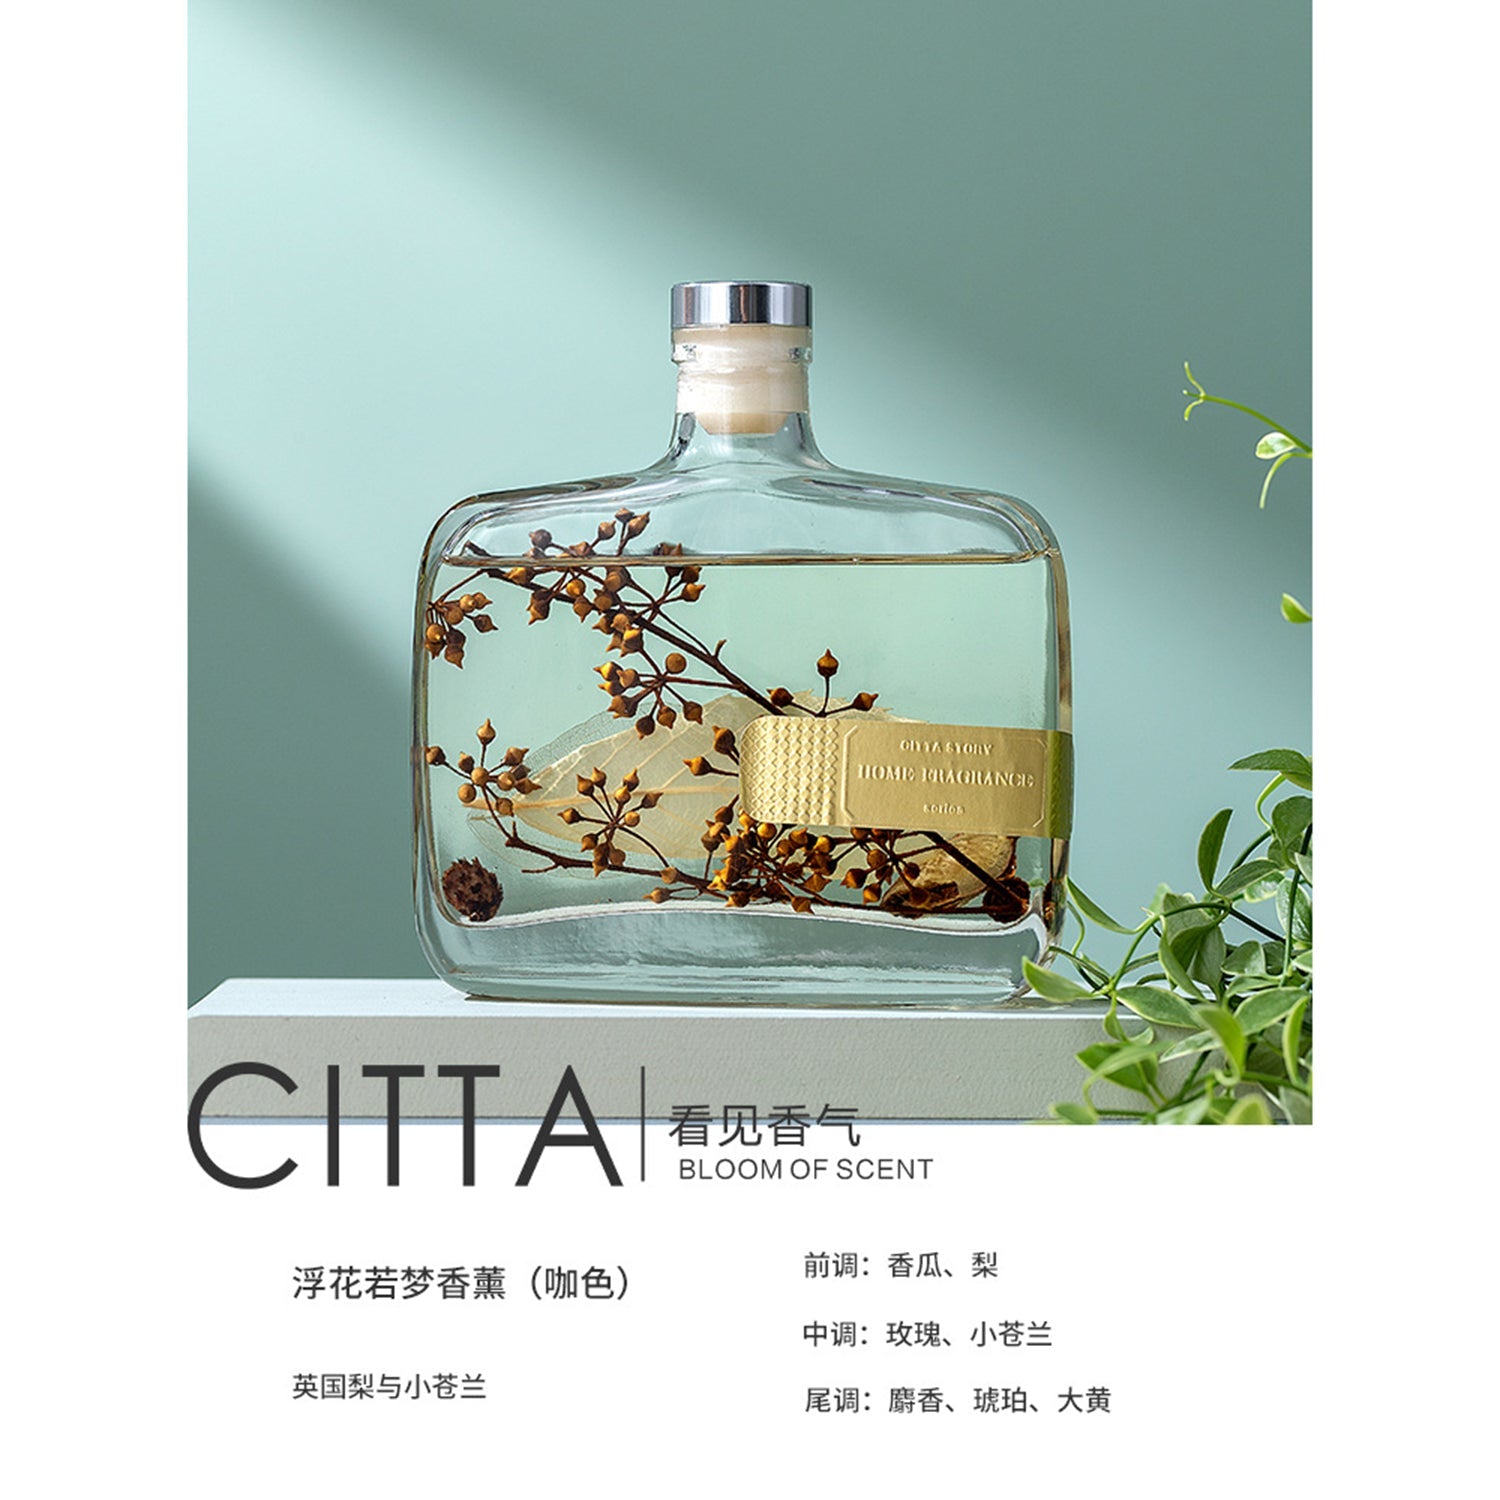 CITTA Dream Series Reed Diffuser Aromatherapy 350ML Premium Essential Oil with Reed Stick and Dry Flower Reed Diffuser CITTA English Pear & Freesia 